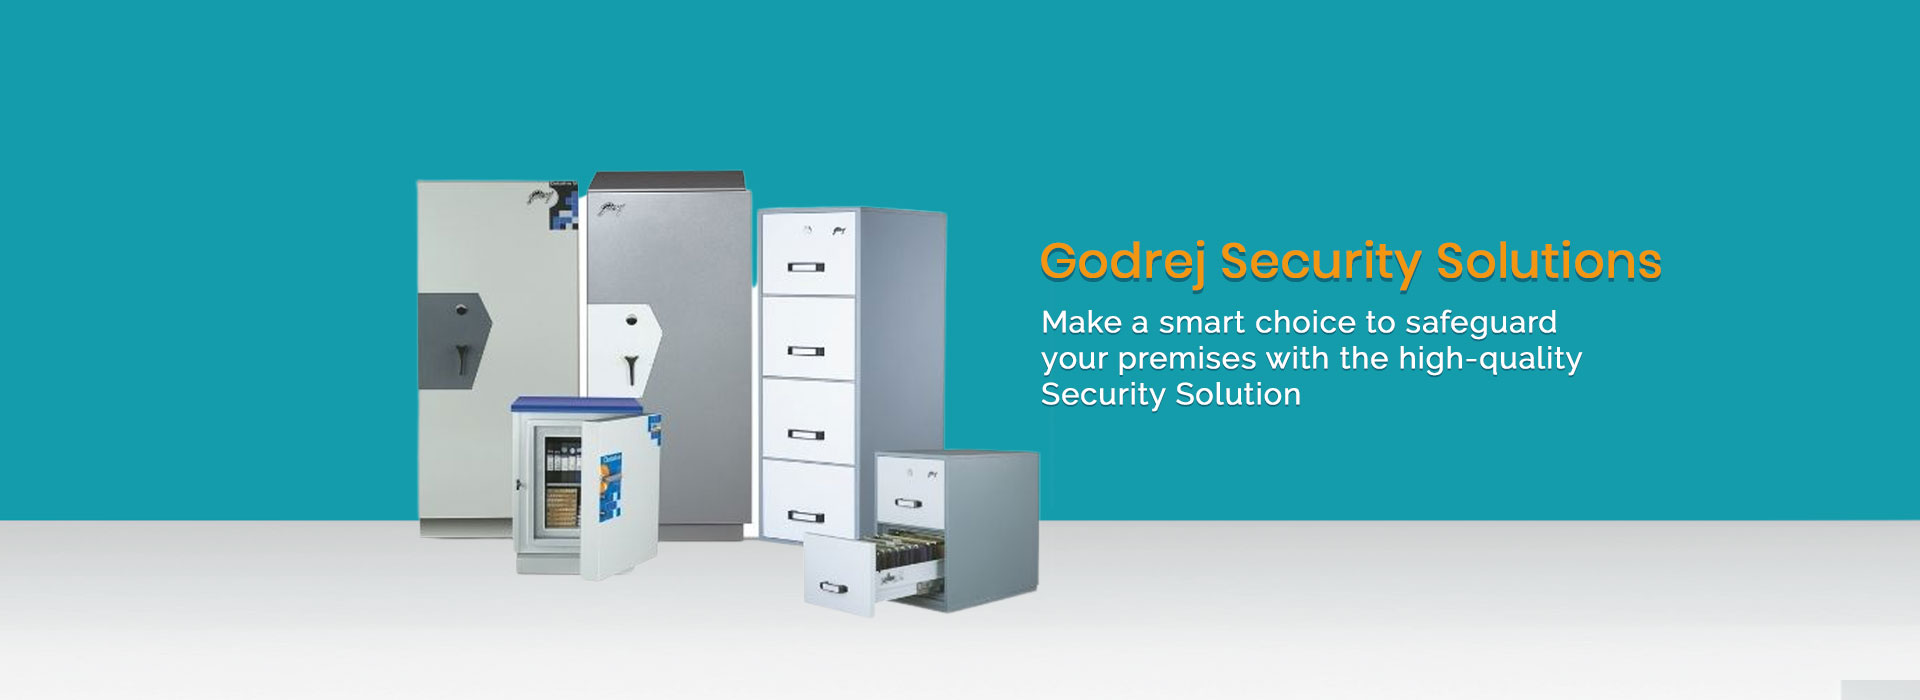 Godrej Security Solutions in Nehru Place 2